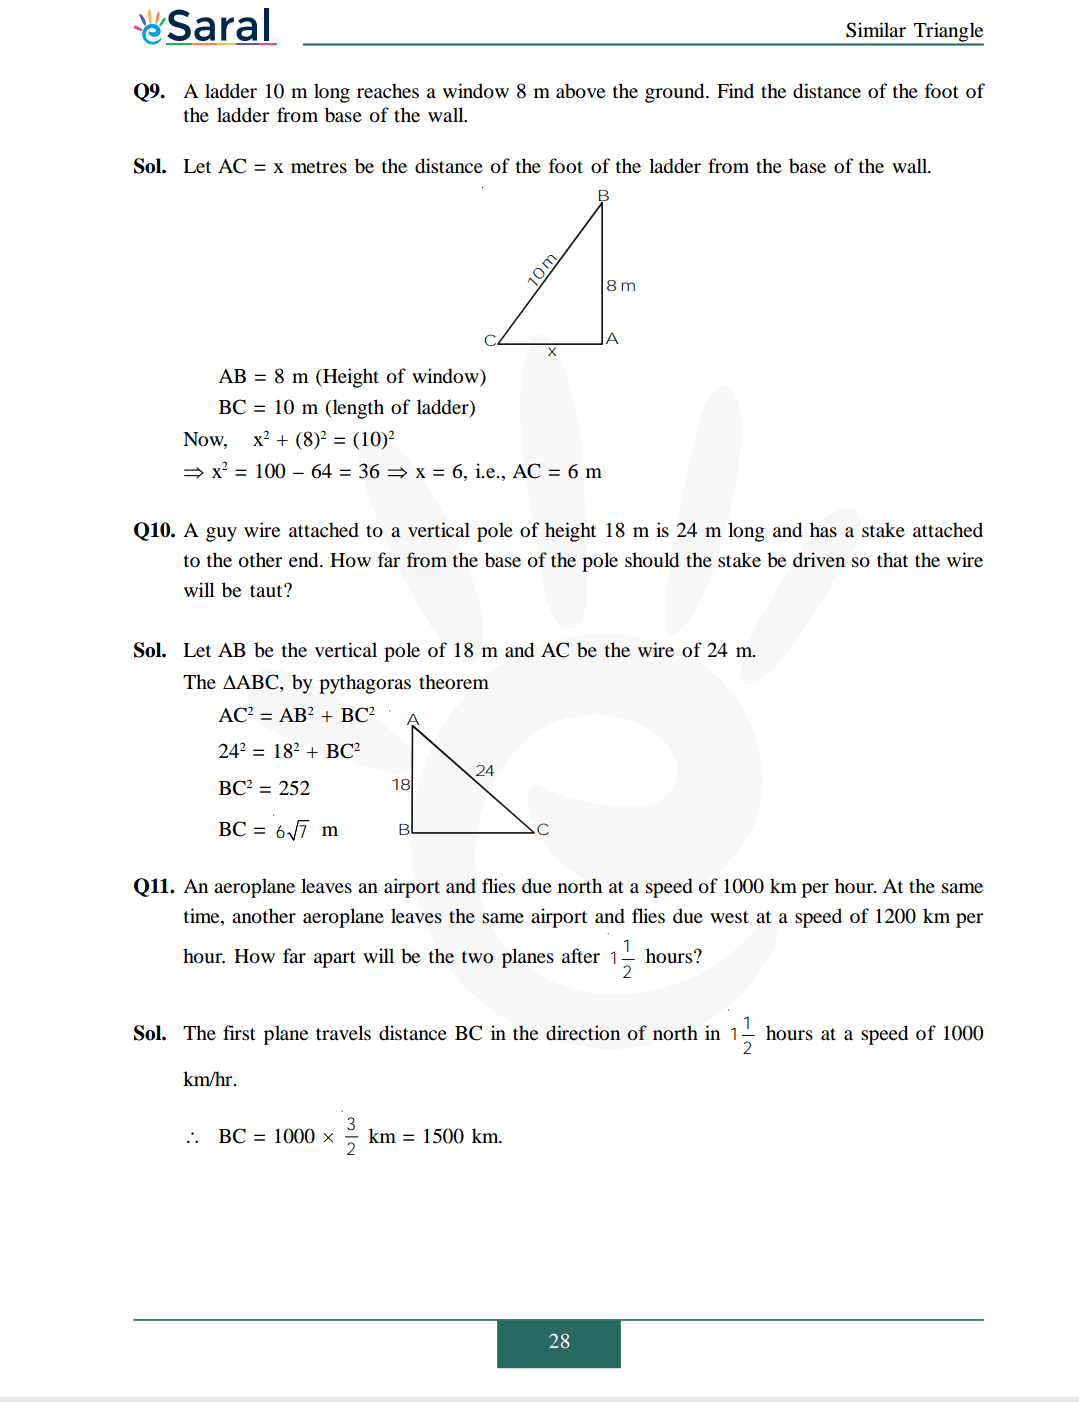 Class 10 Maths Chapter 6 exercise 6.5 solutions Image 5